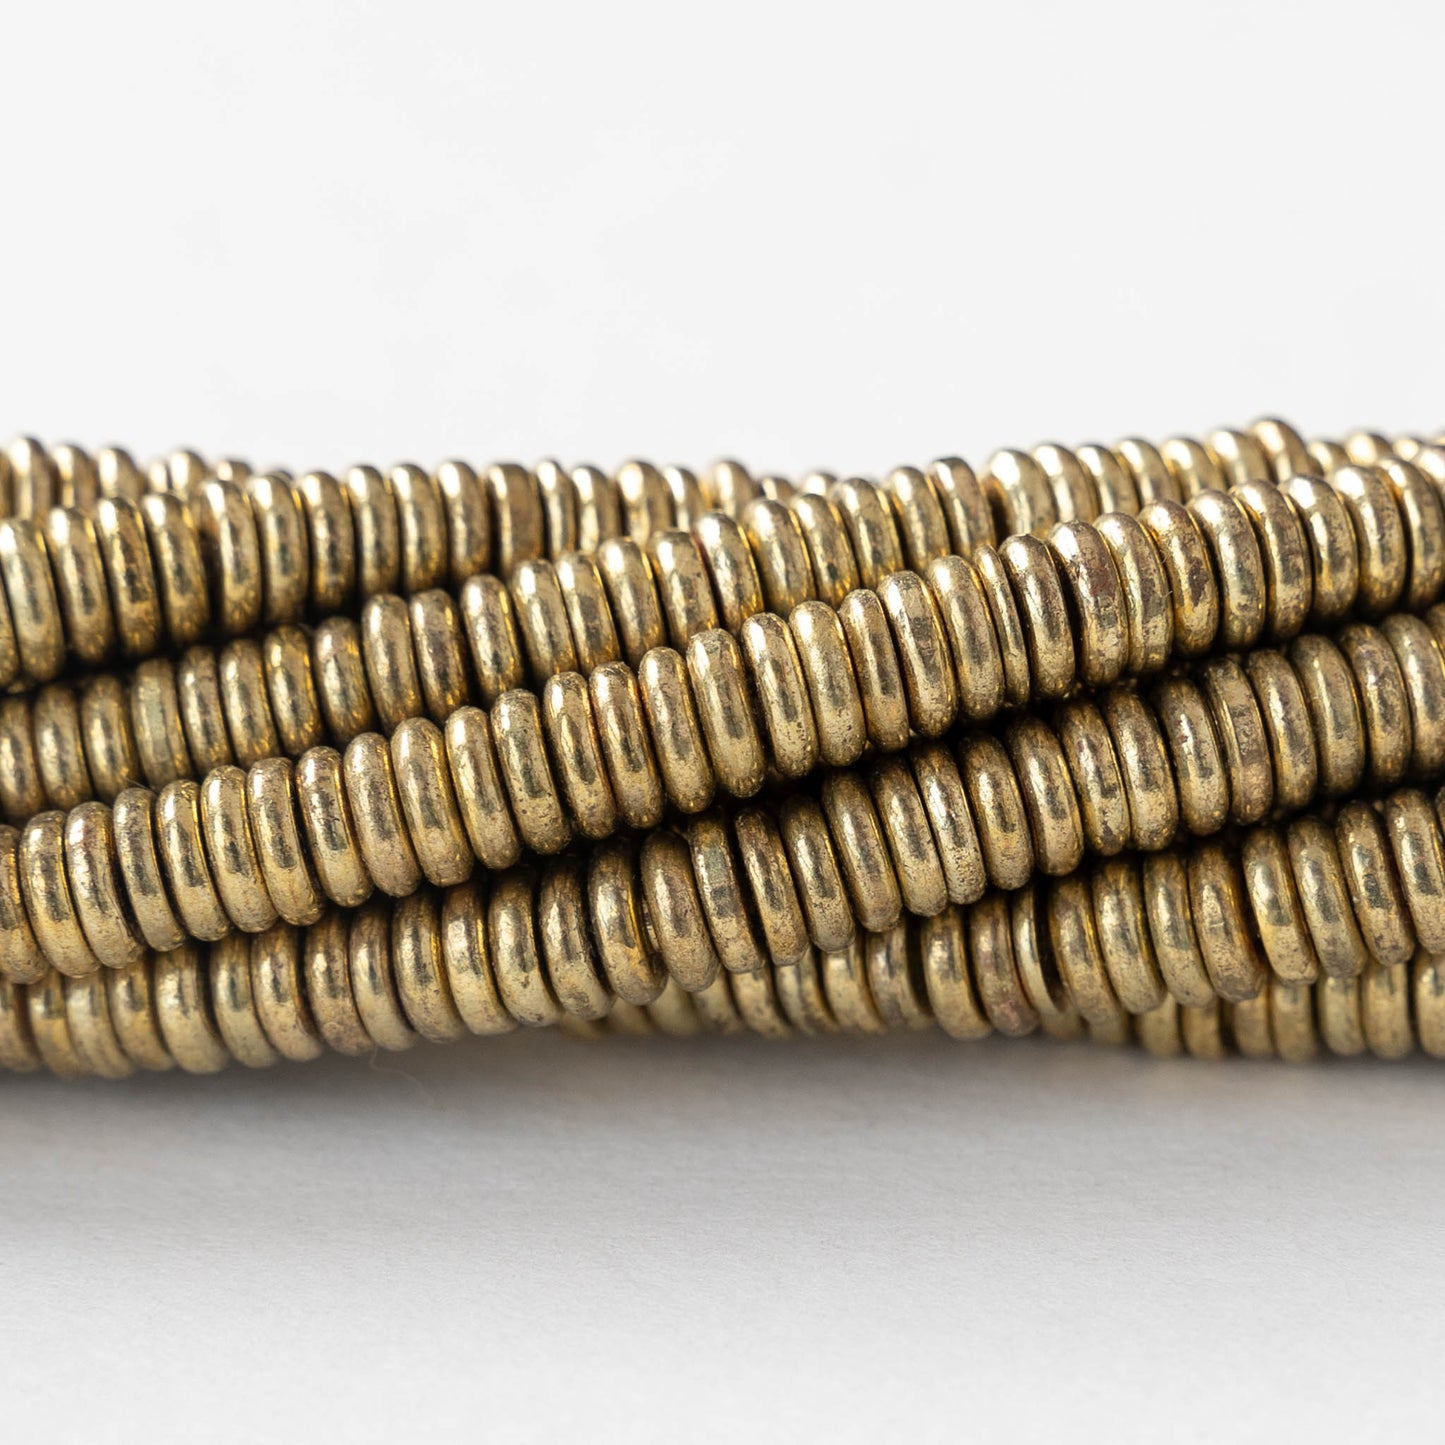 5mm Brass Disk Beads - 4 inches